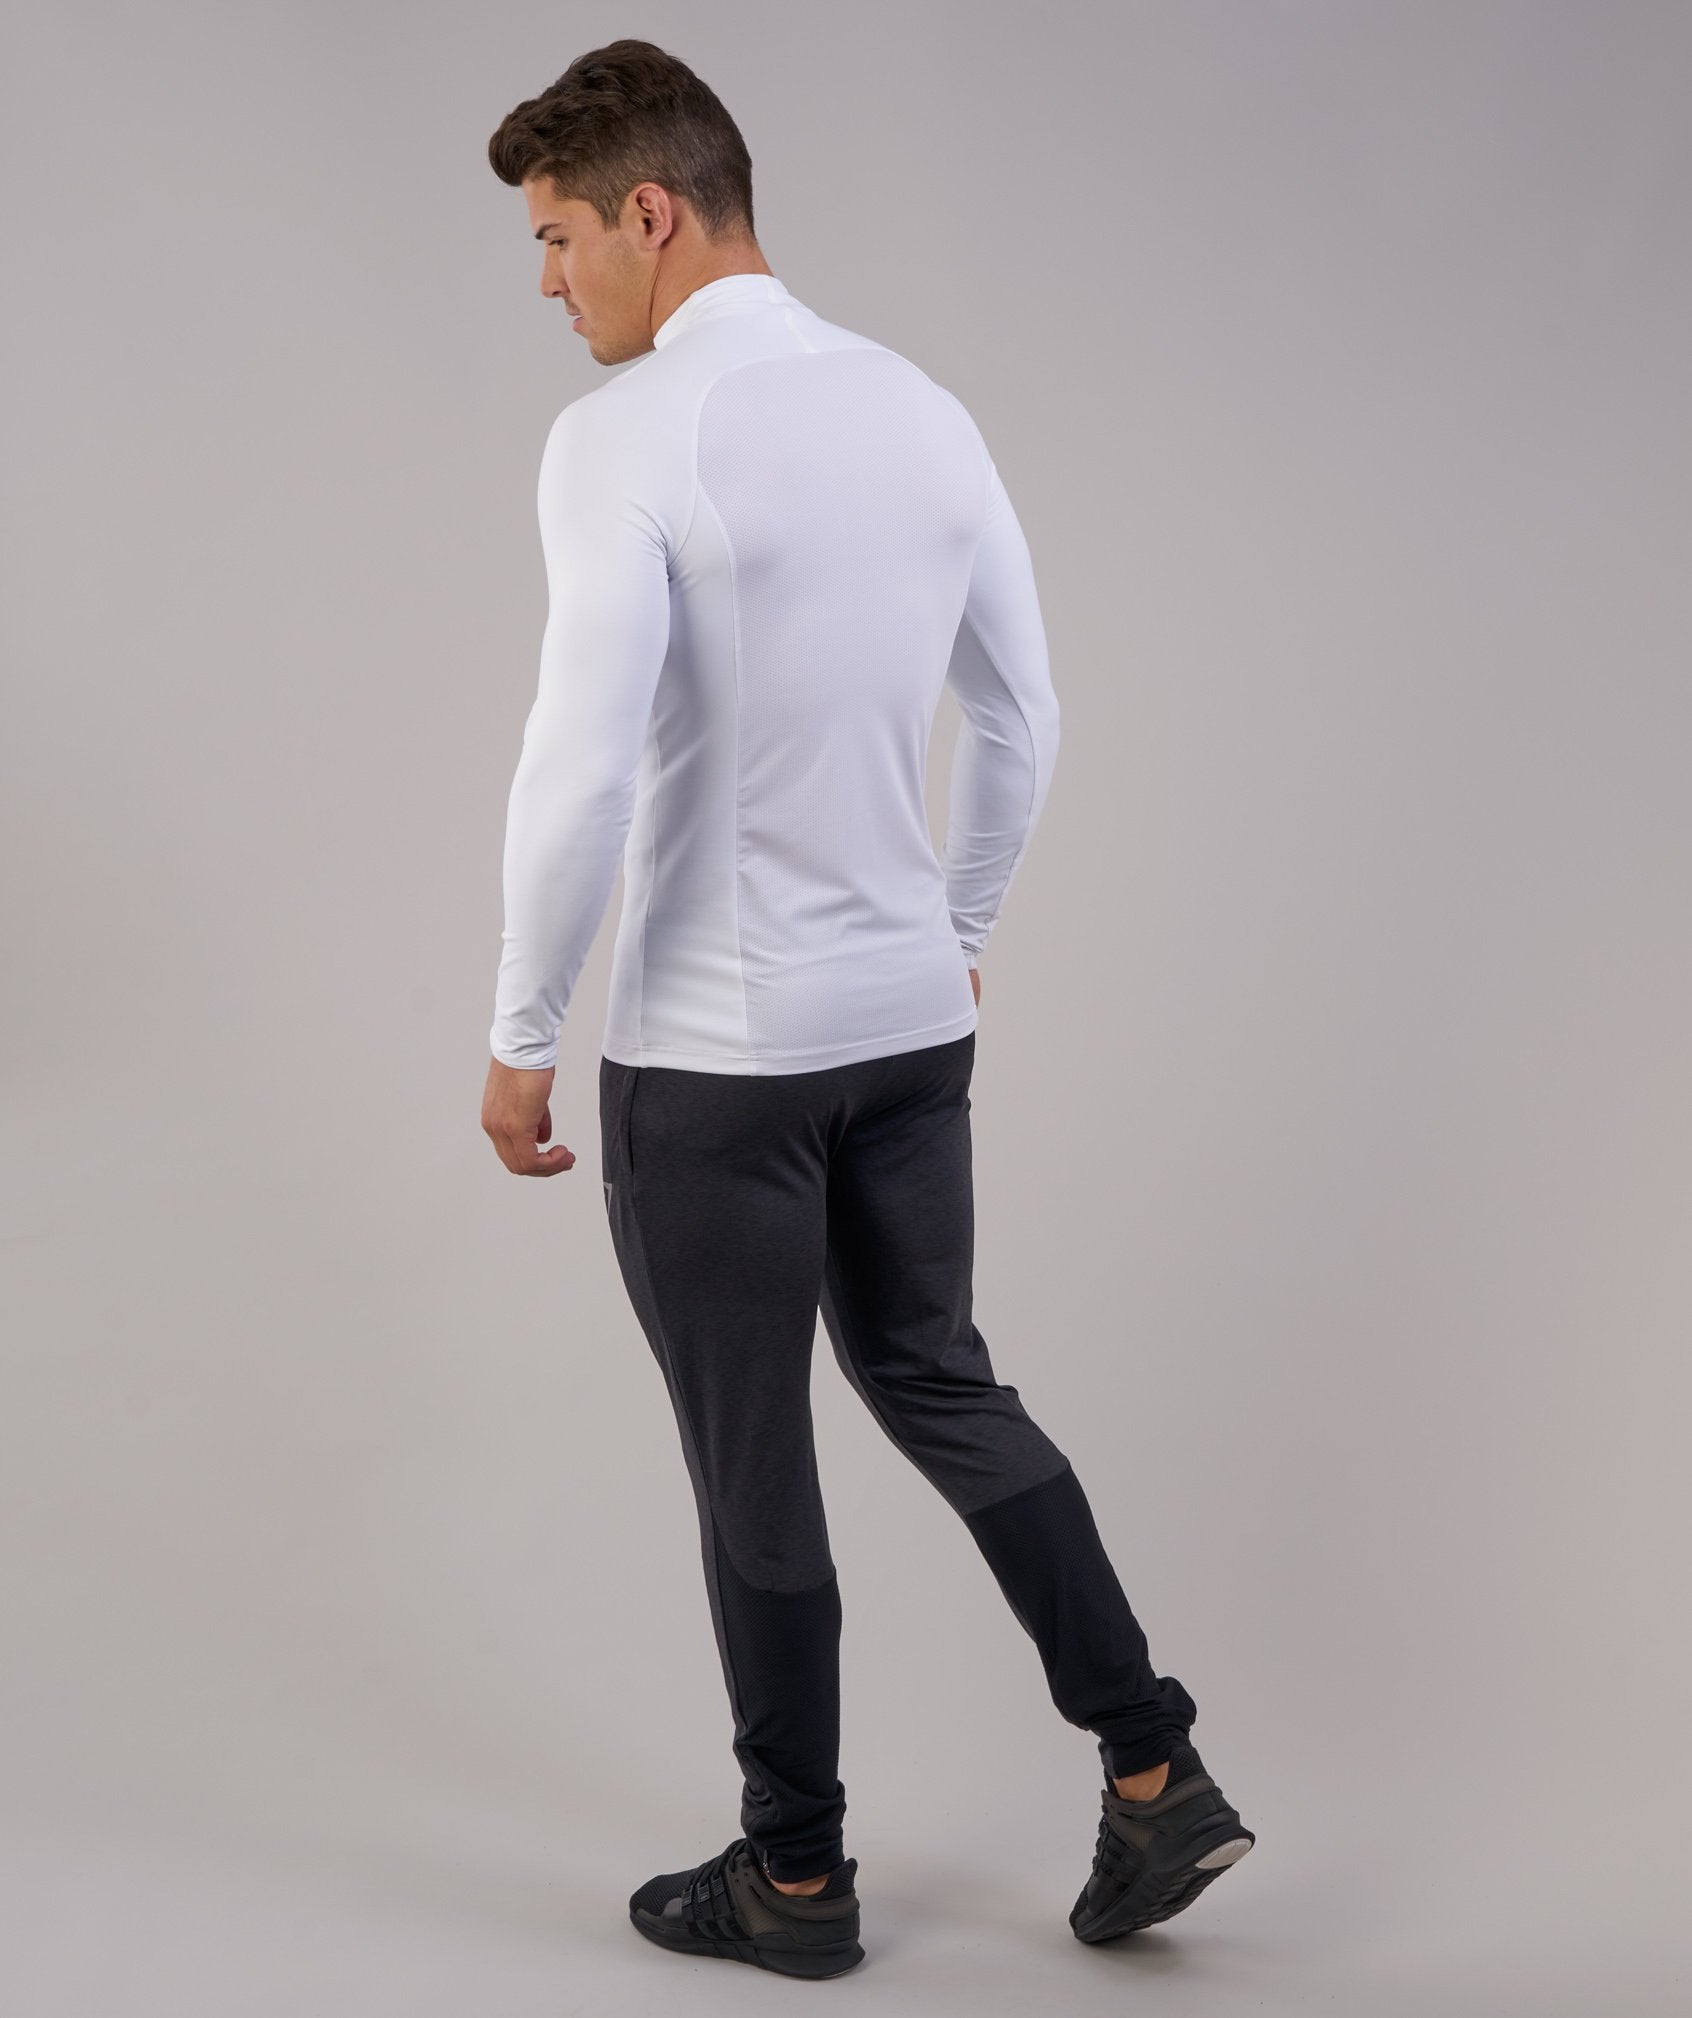 Edge 1/4 Zip Pullover in White - view 4